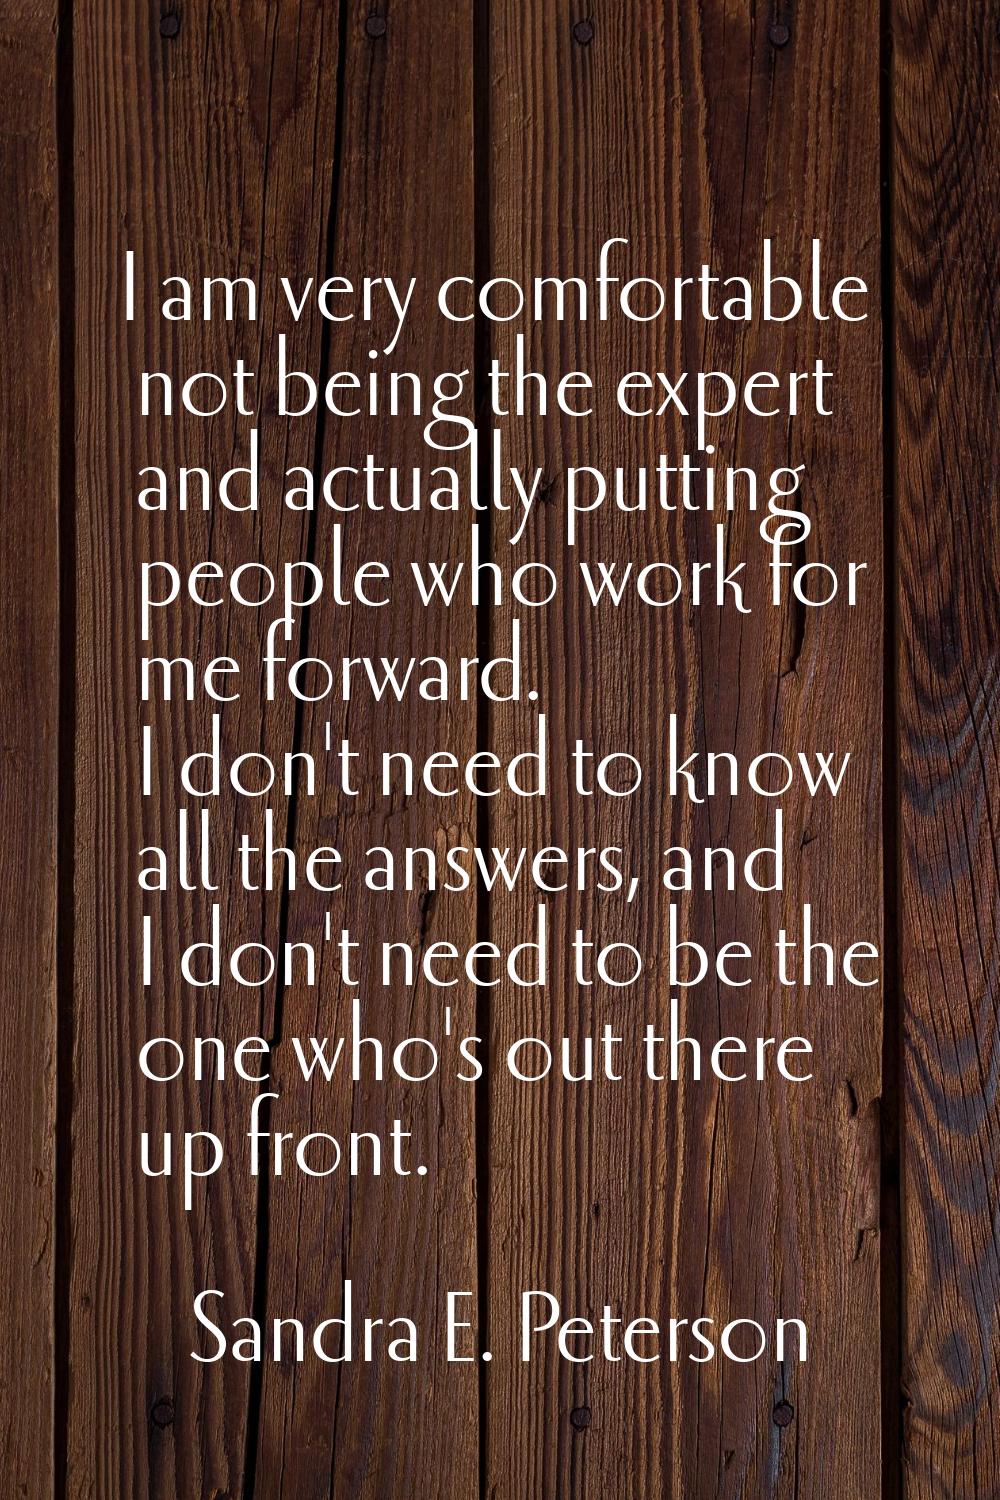 I am very comfortable not being the expert and actually putting people who work for me forward. I d